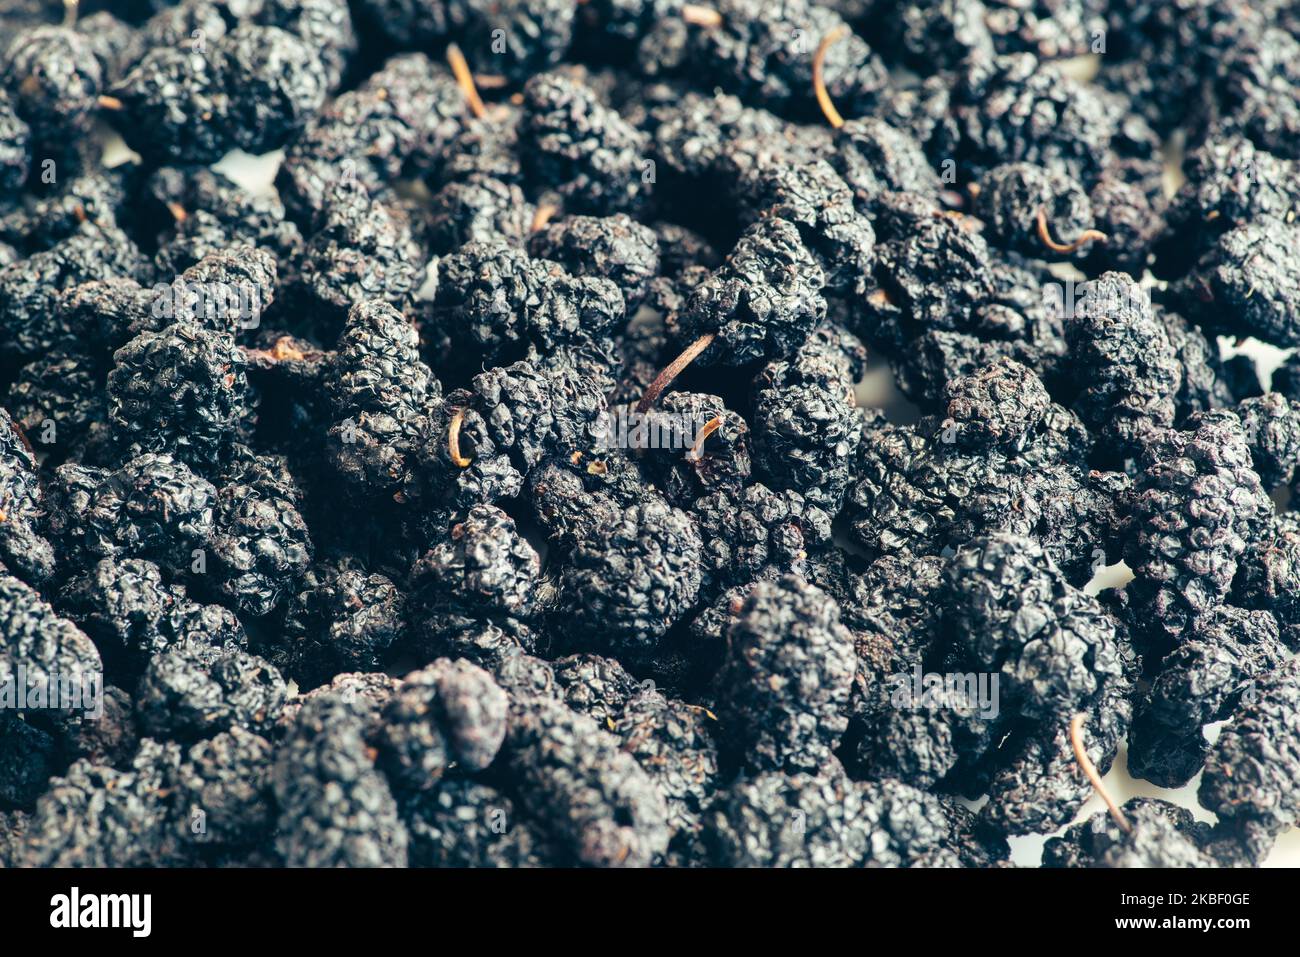 Organic Dried Black Mulberries,healthy food concept Stock Photo